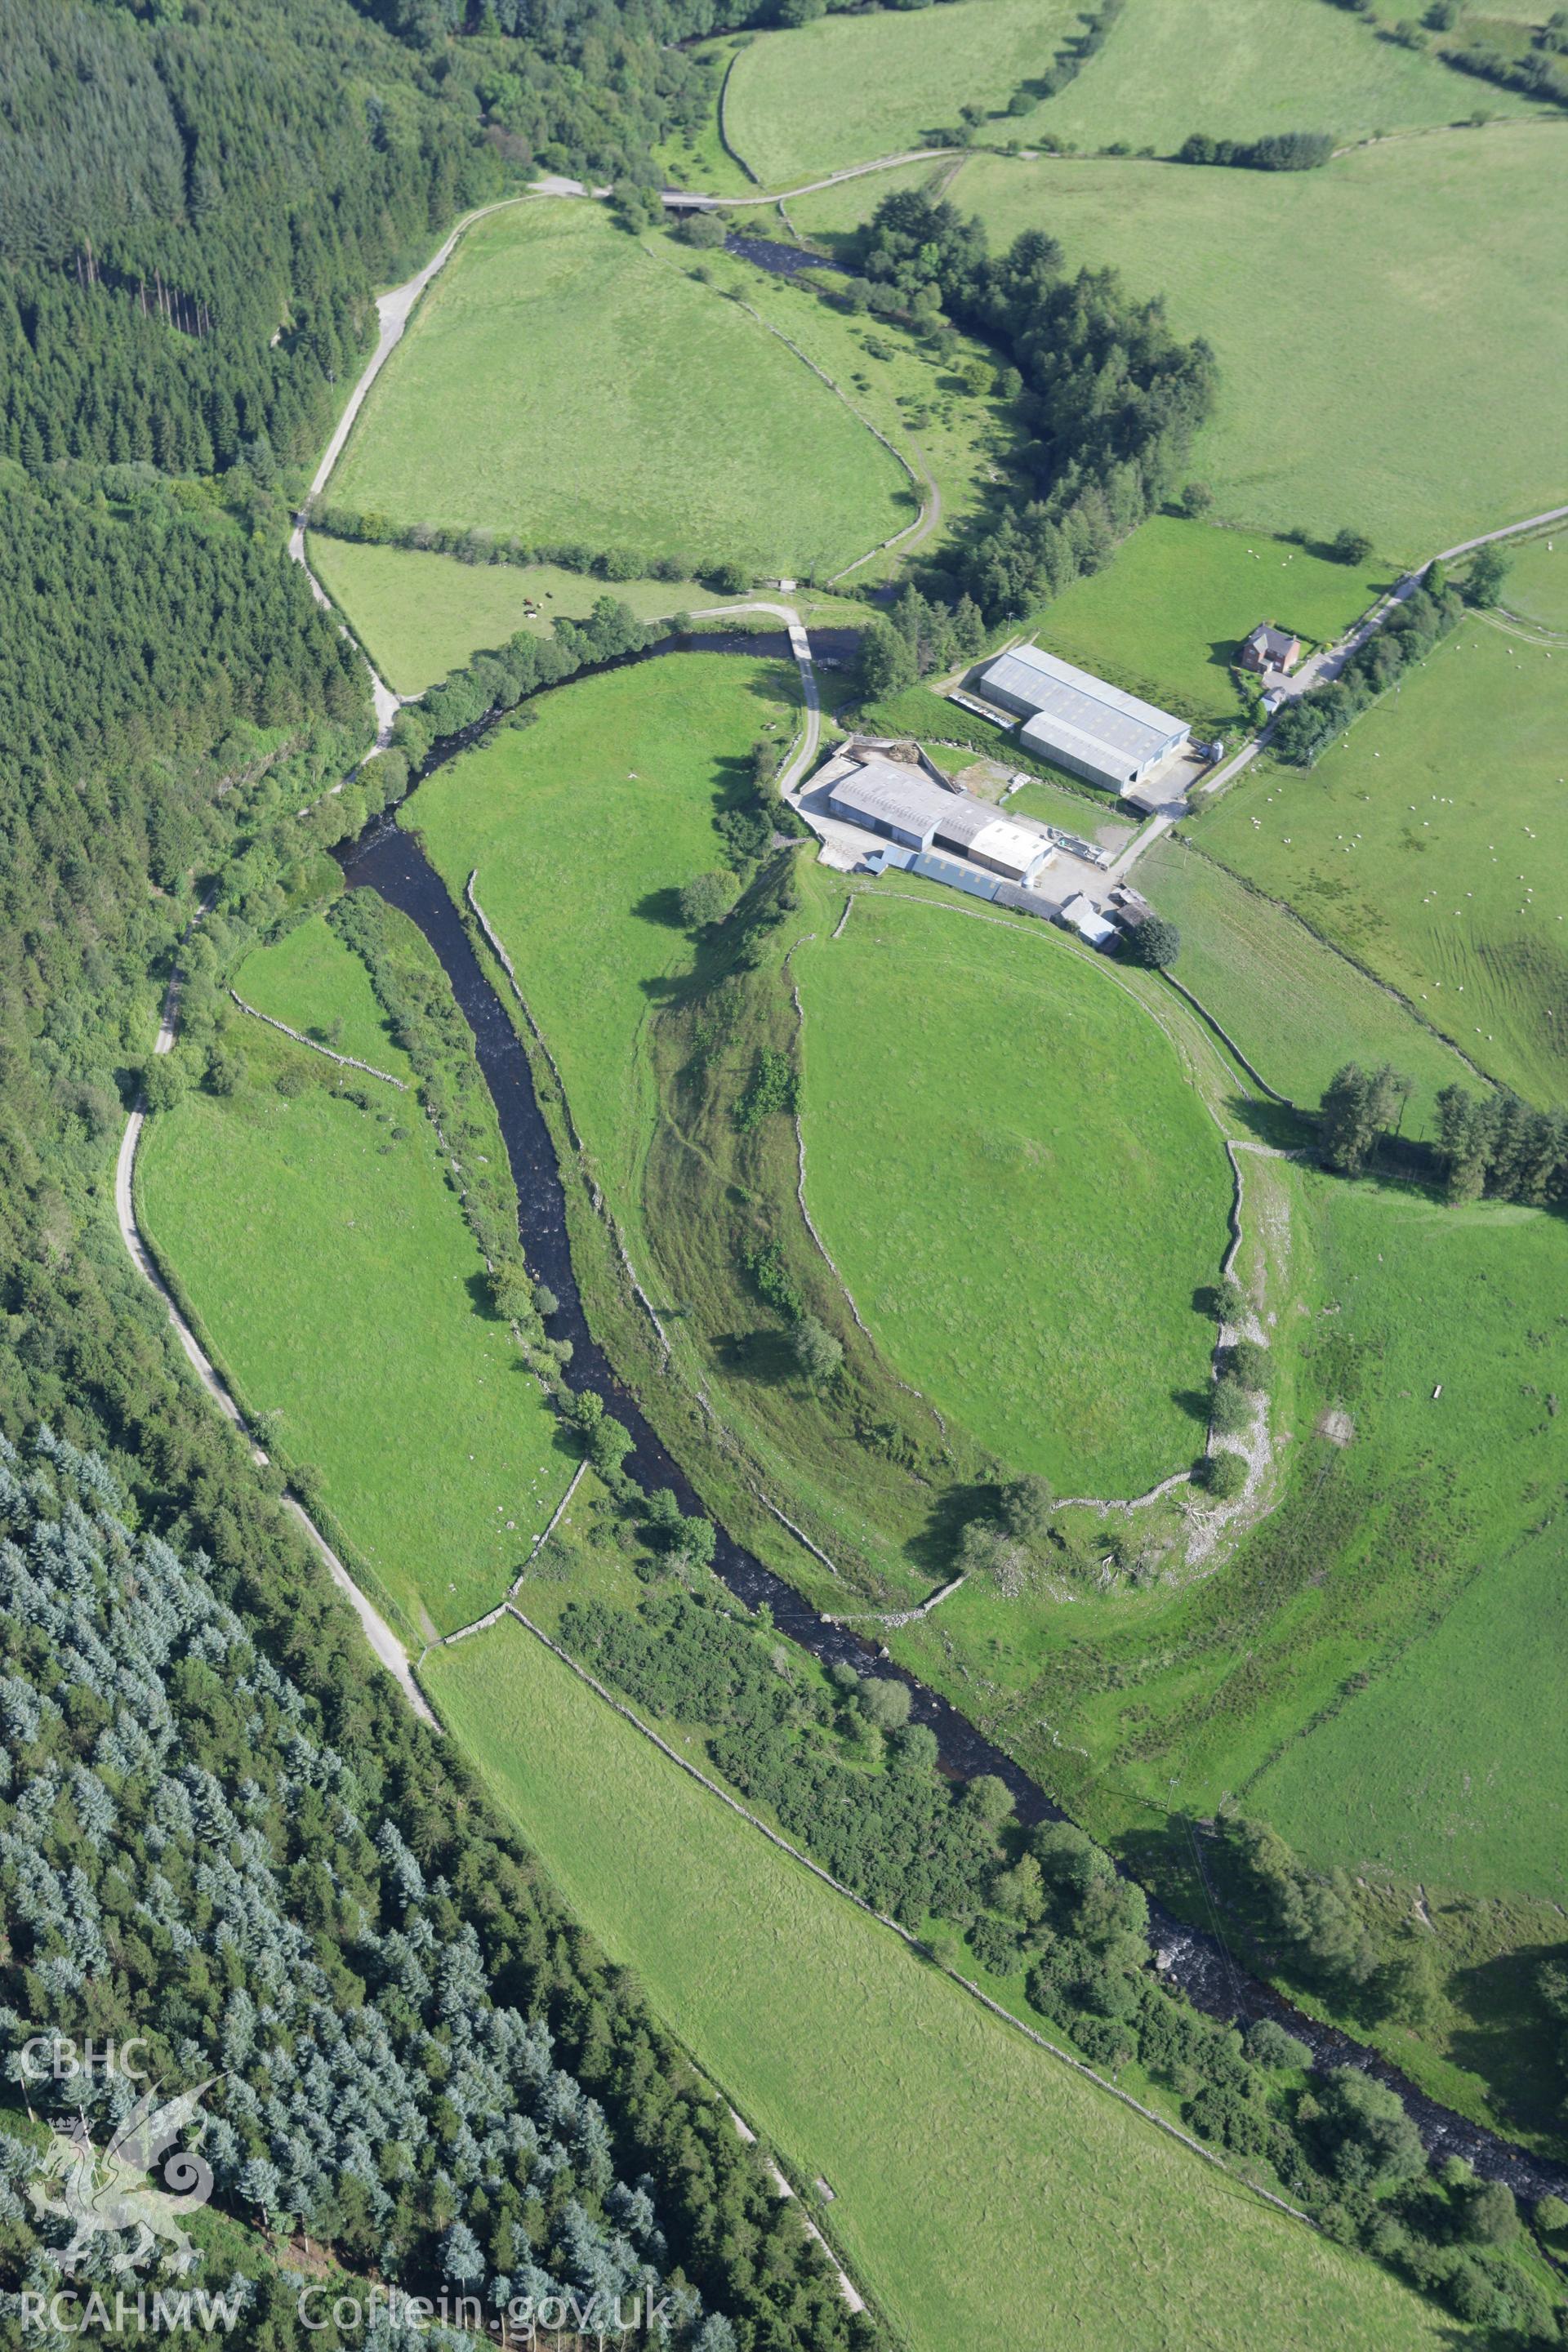 RCAHMW colour oblique aerial photograph of Caer Ddunod. Taken on 31 July 2007 by Toby Driver